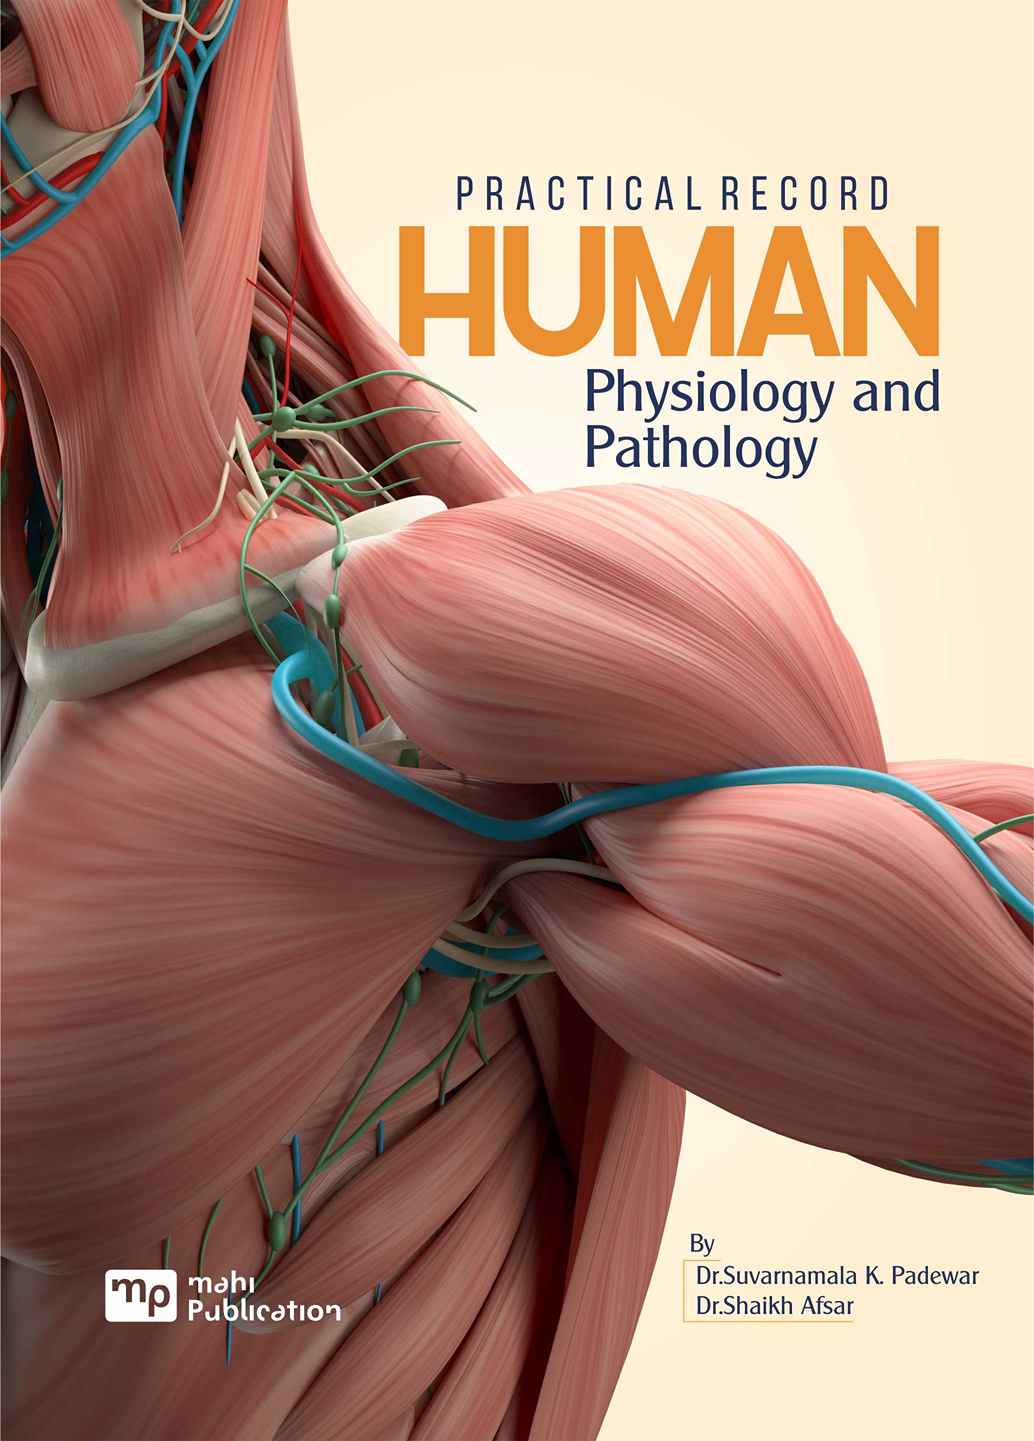 Practical Record Human Physiology and Pathology